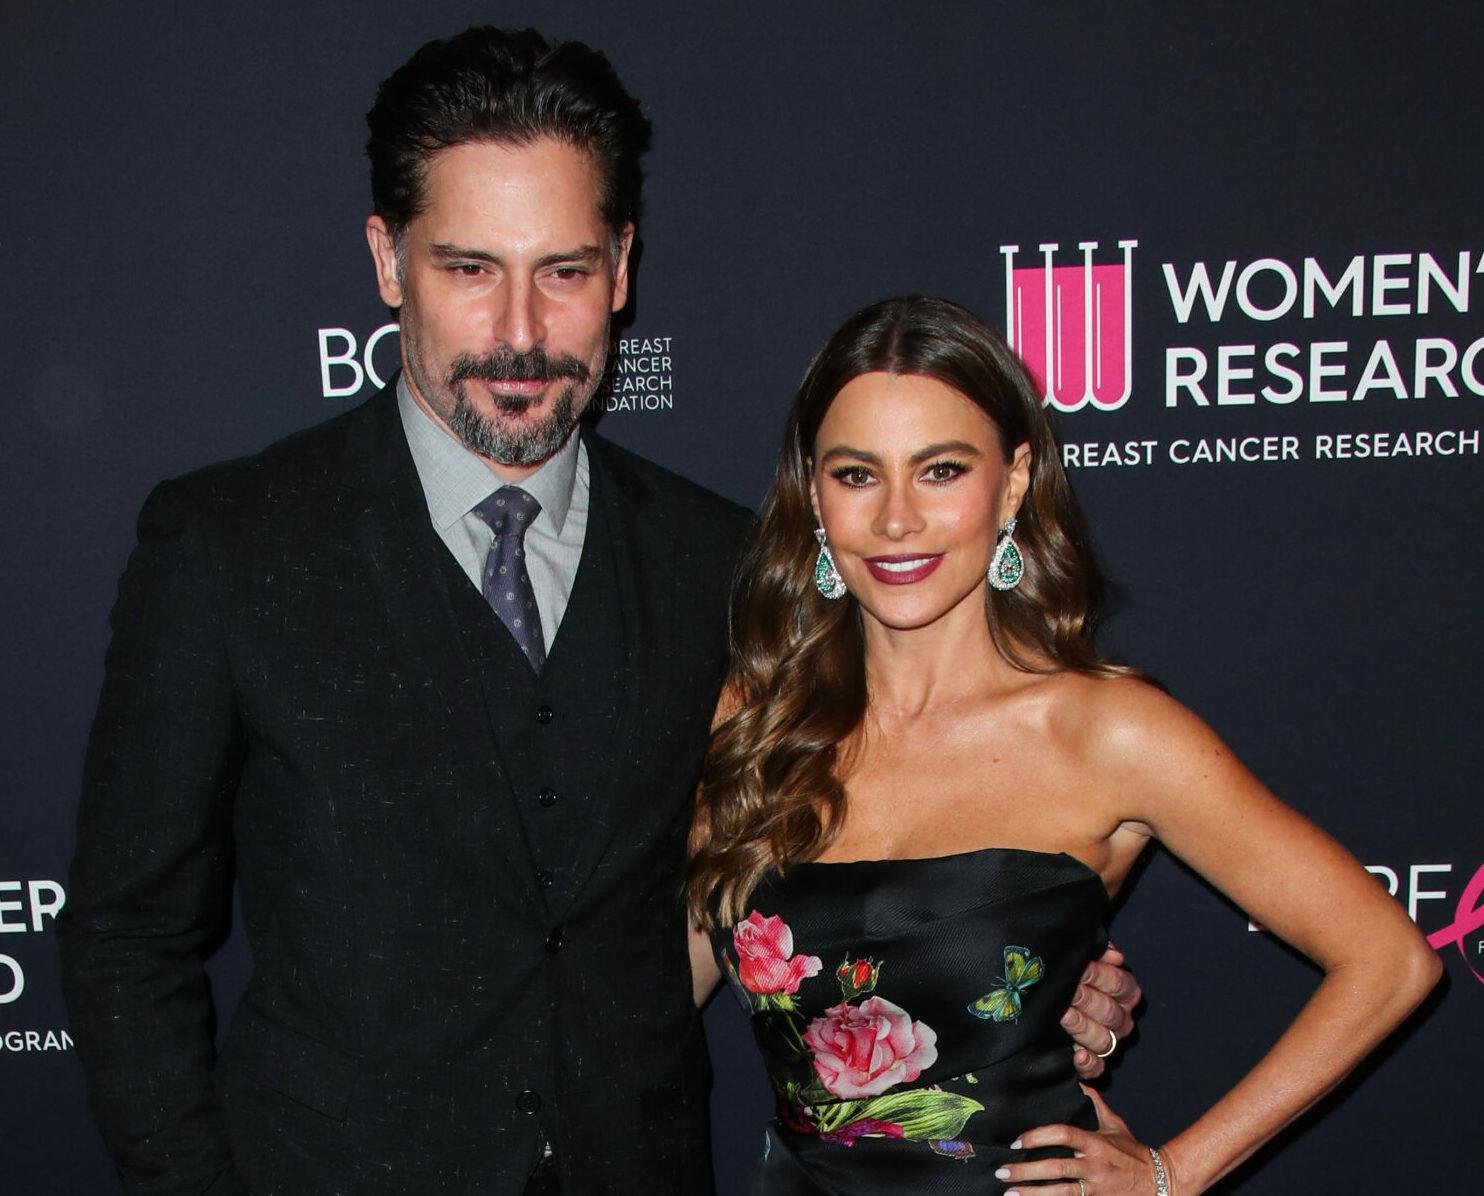 The Women's Cancer Research Fund's An Unforgettable Evening Benefit Gala held at The Beverly Wilshire Hotel on February 27, 2018 in Beverly Hills, Los Angeles, California, United States. 27 Feb 2018 Pictured: Joe Manganiello, Sofia Vergara.